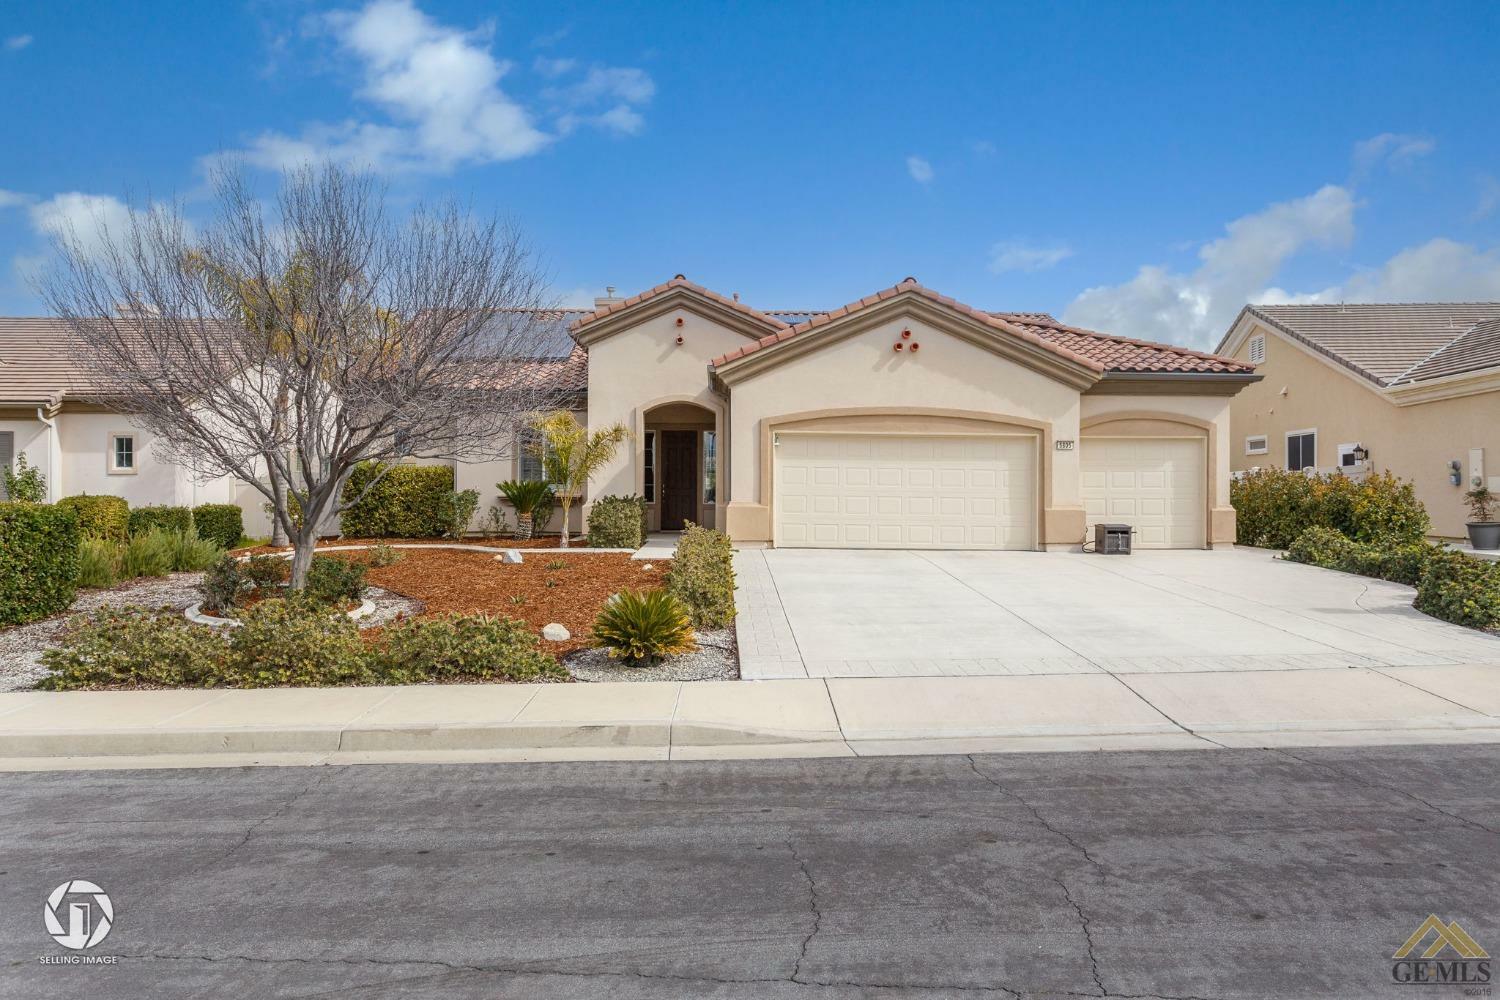 5805 Calico Cove Ct. Court  Bakersfield CA 93306 photo